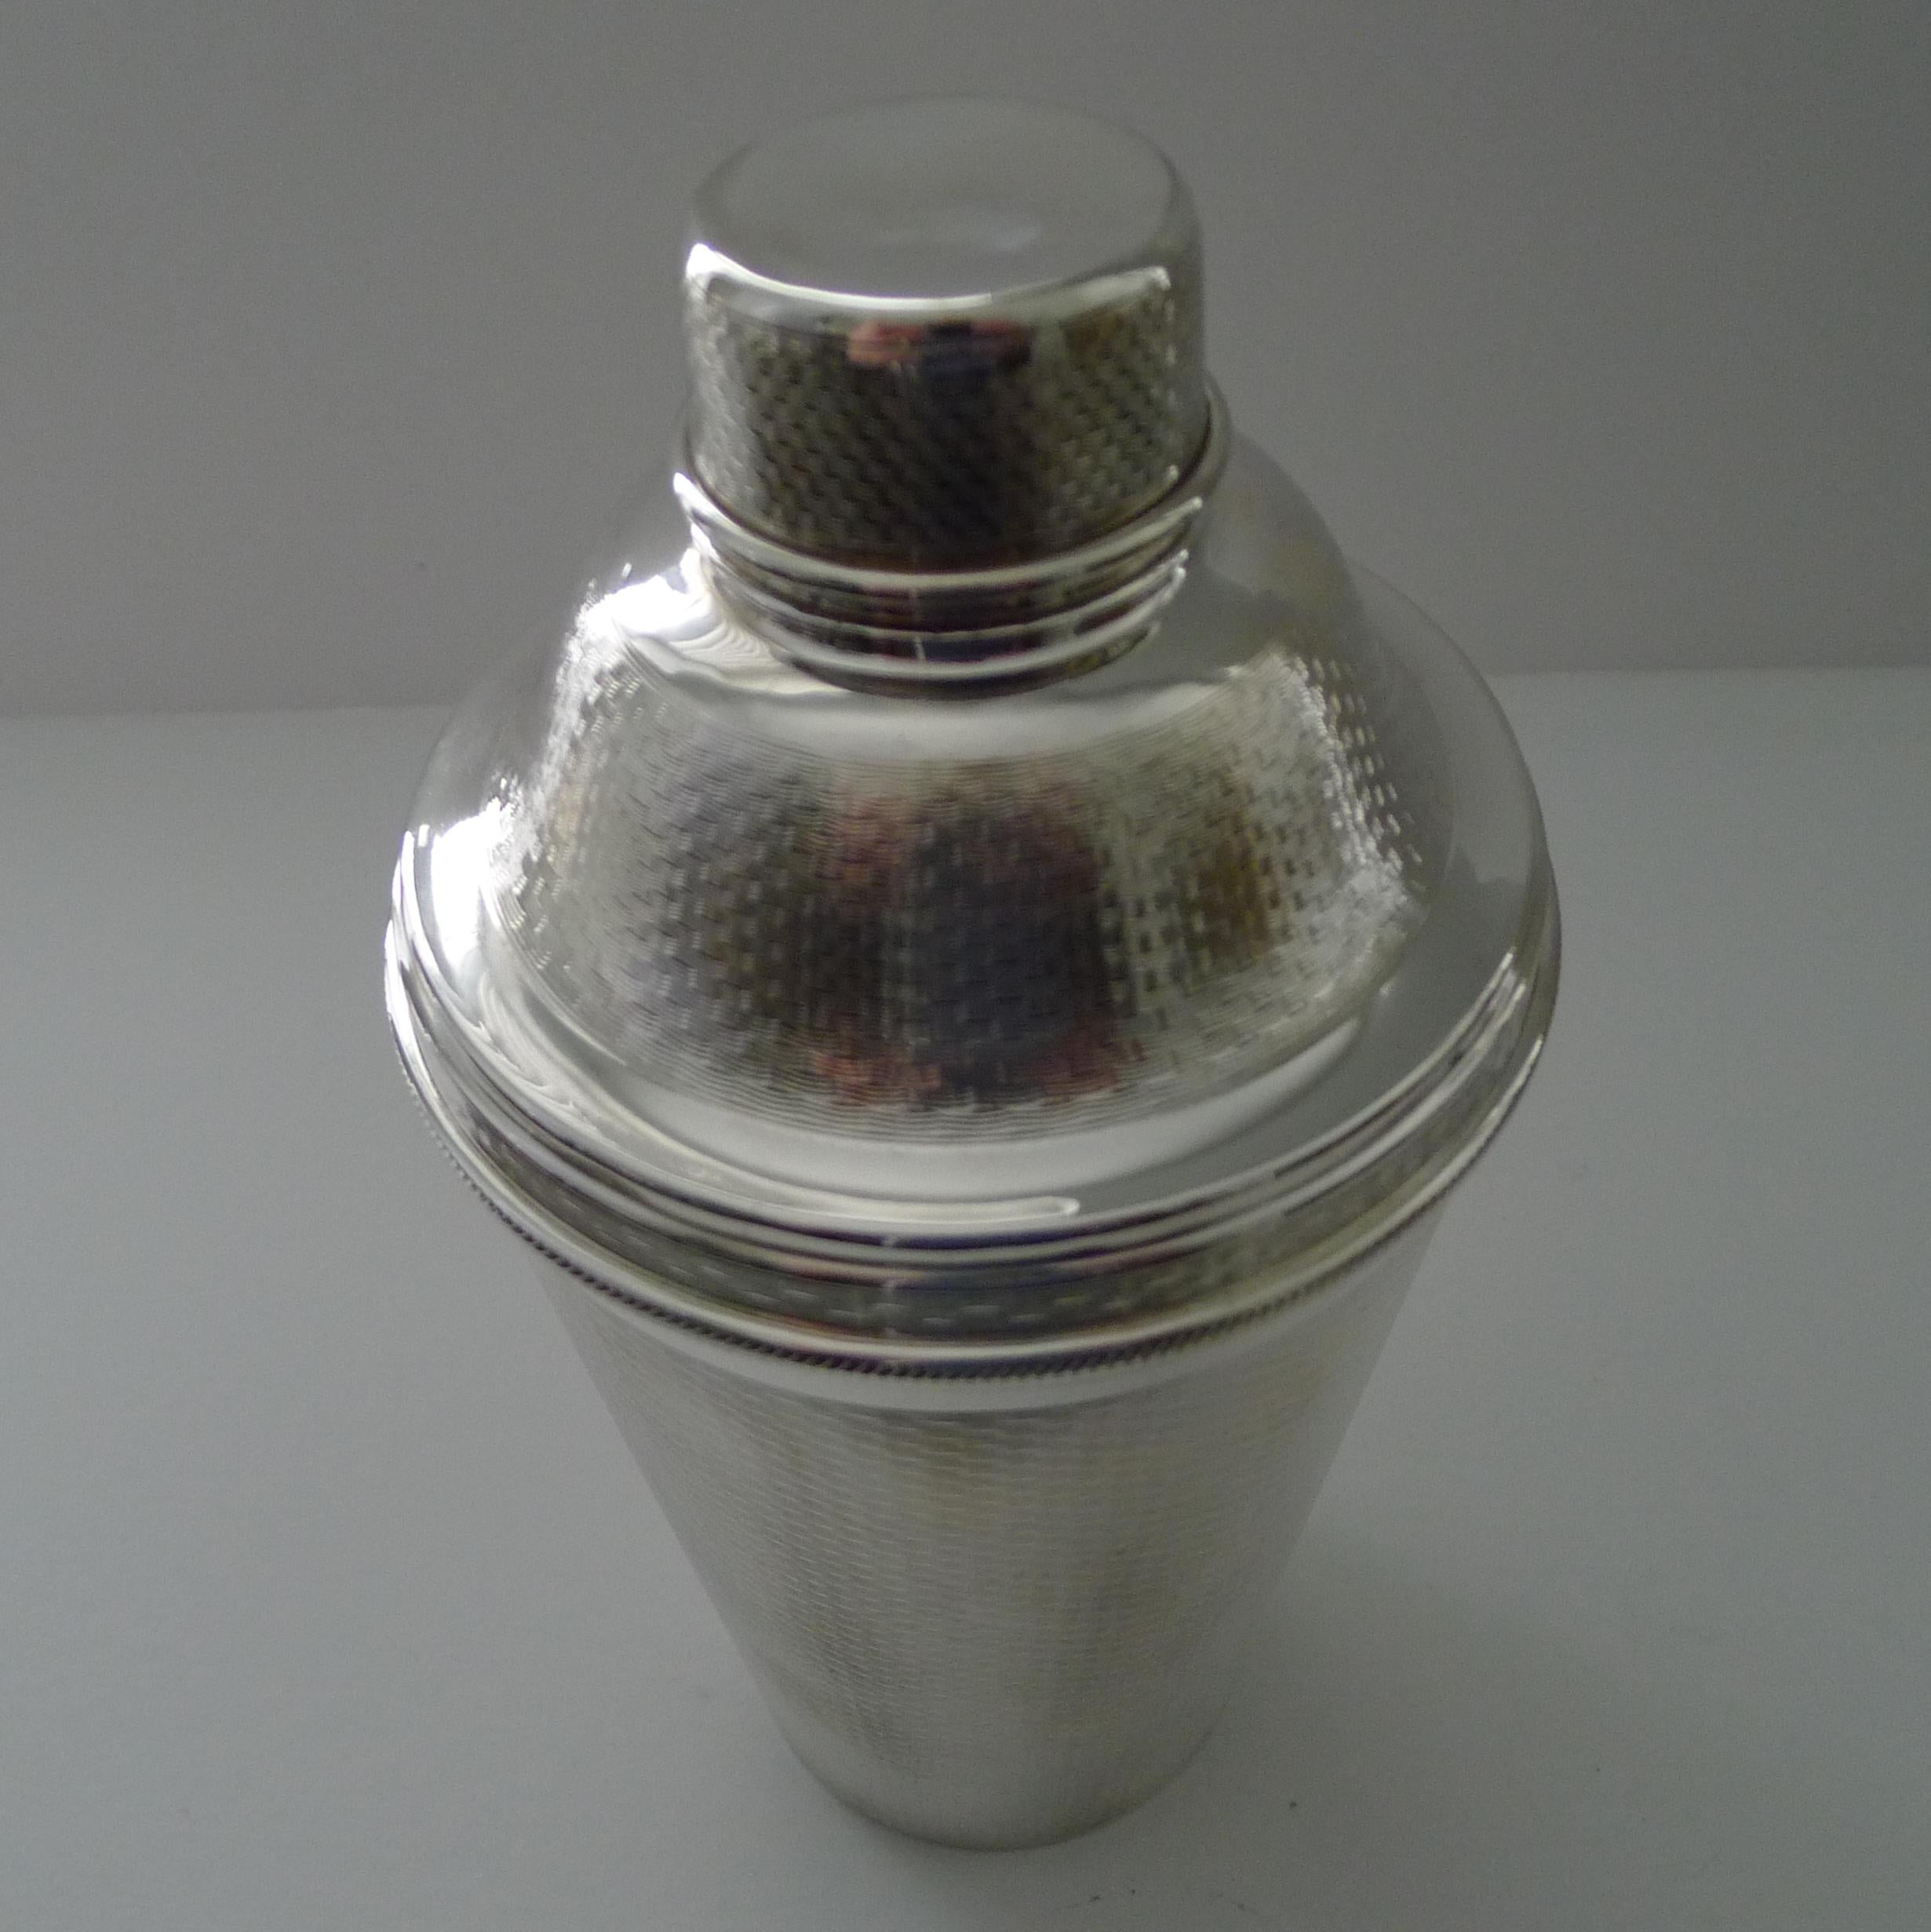 This is a wonderful and most unusual vintage silver plated cocktail Shaker decorated all-over with a continuous engine-turned basket weave decoration; elegantly decorative and tactile. Hard to find in smaller sizes let alone this large 2 1/4 Pint